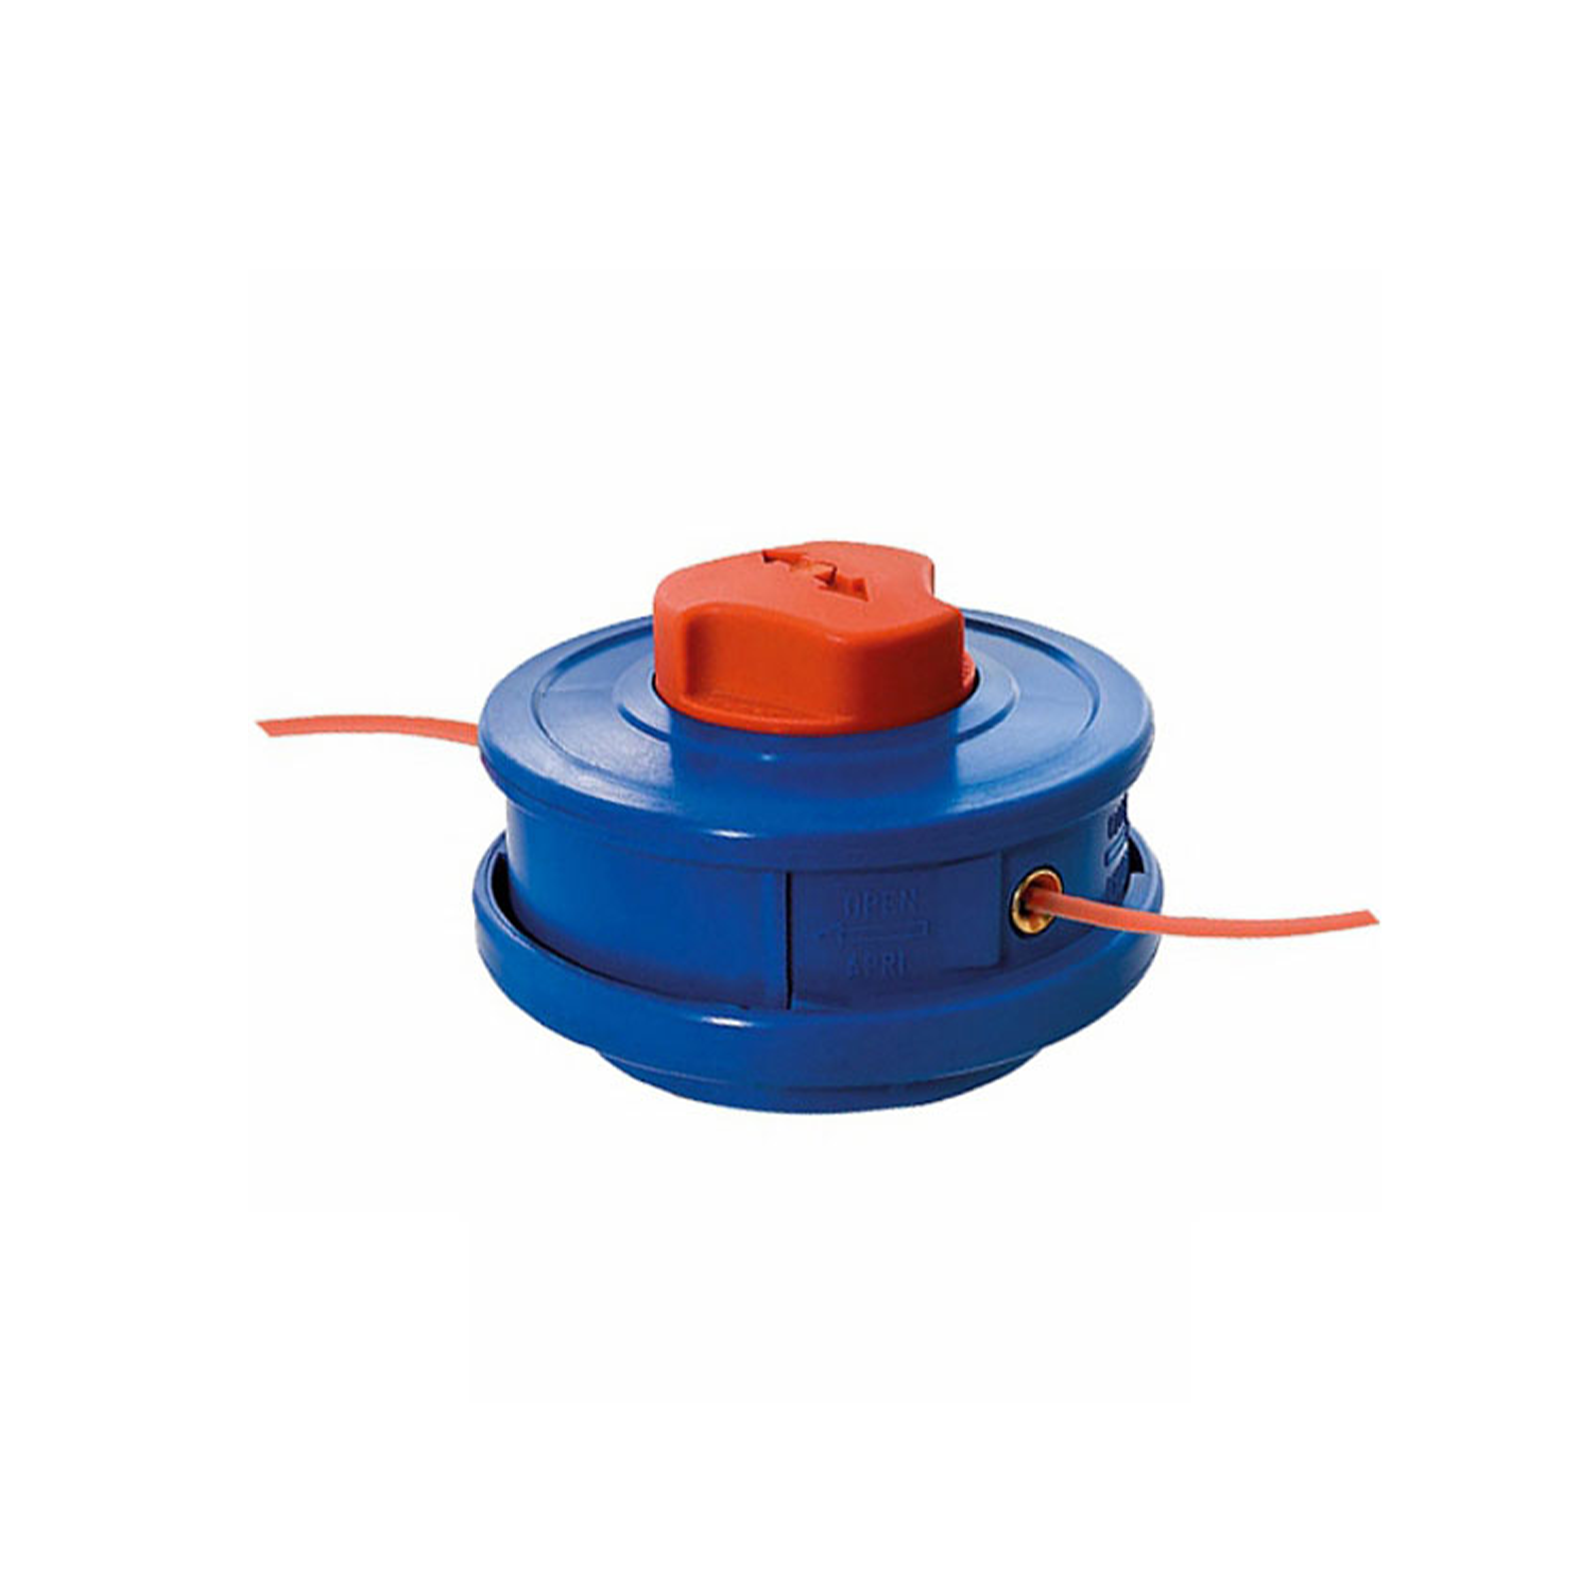 ArnoPlast Mach1 automatic universal head for 2-wire brushcutters